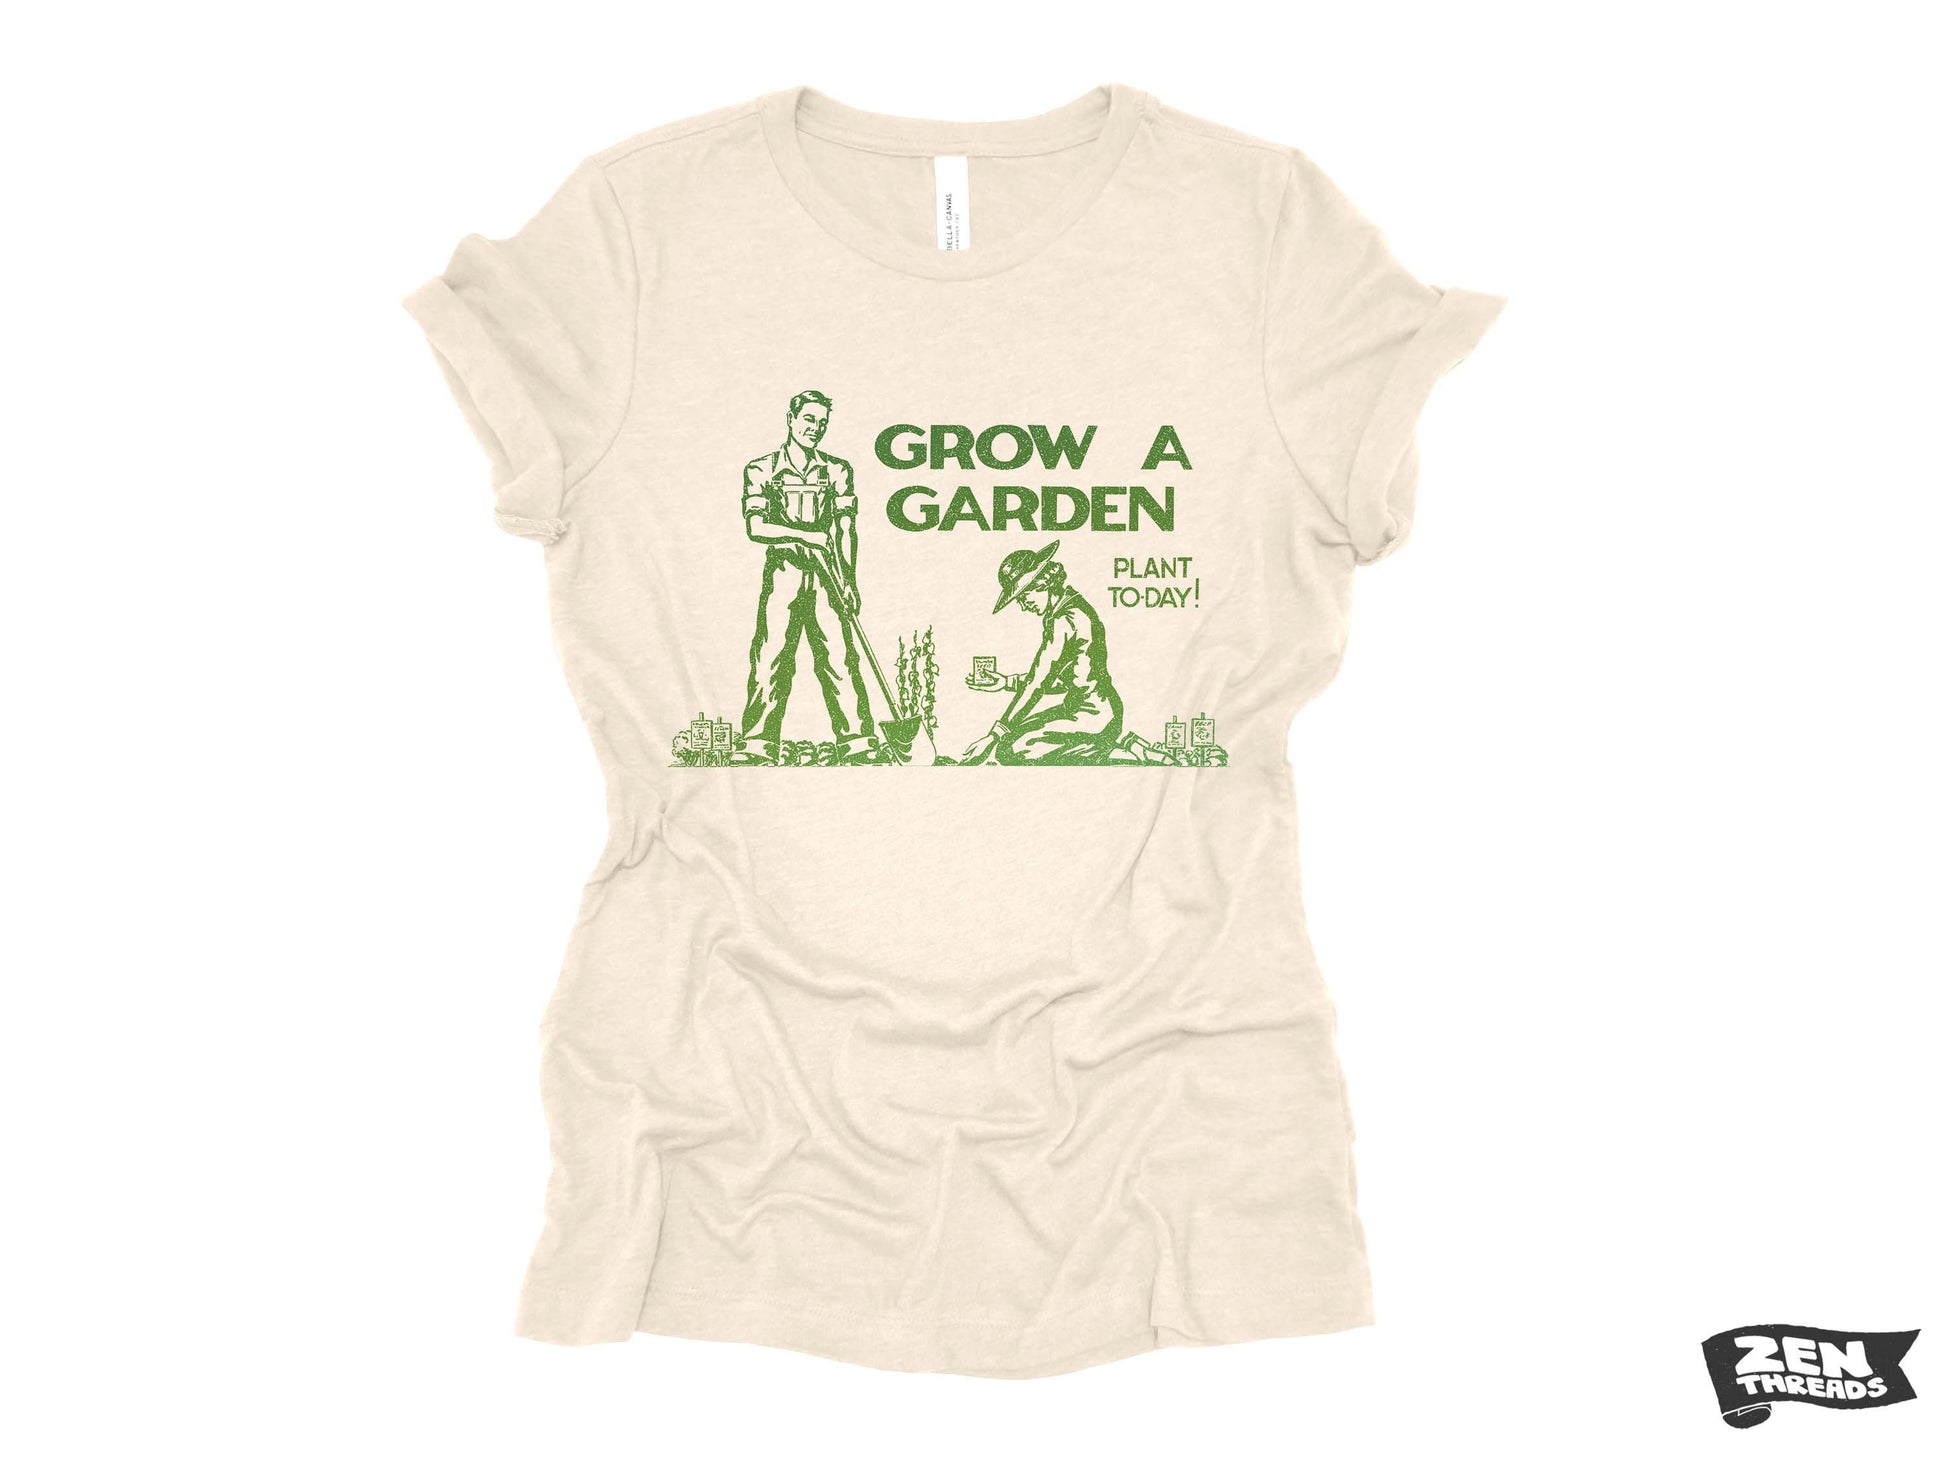 Womens GROW A GARDEN eco soft printed ladies relaxed crew tee nature lover outdoors gardening farmer plants trees grow your own food top